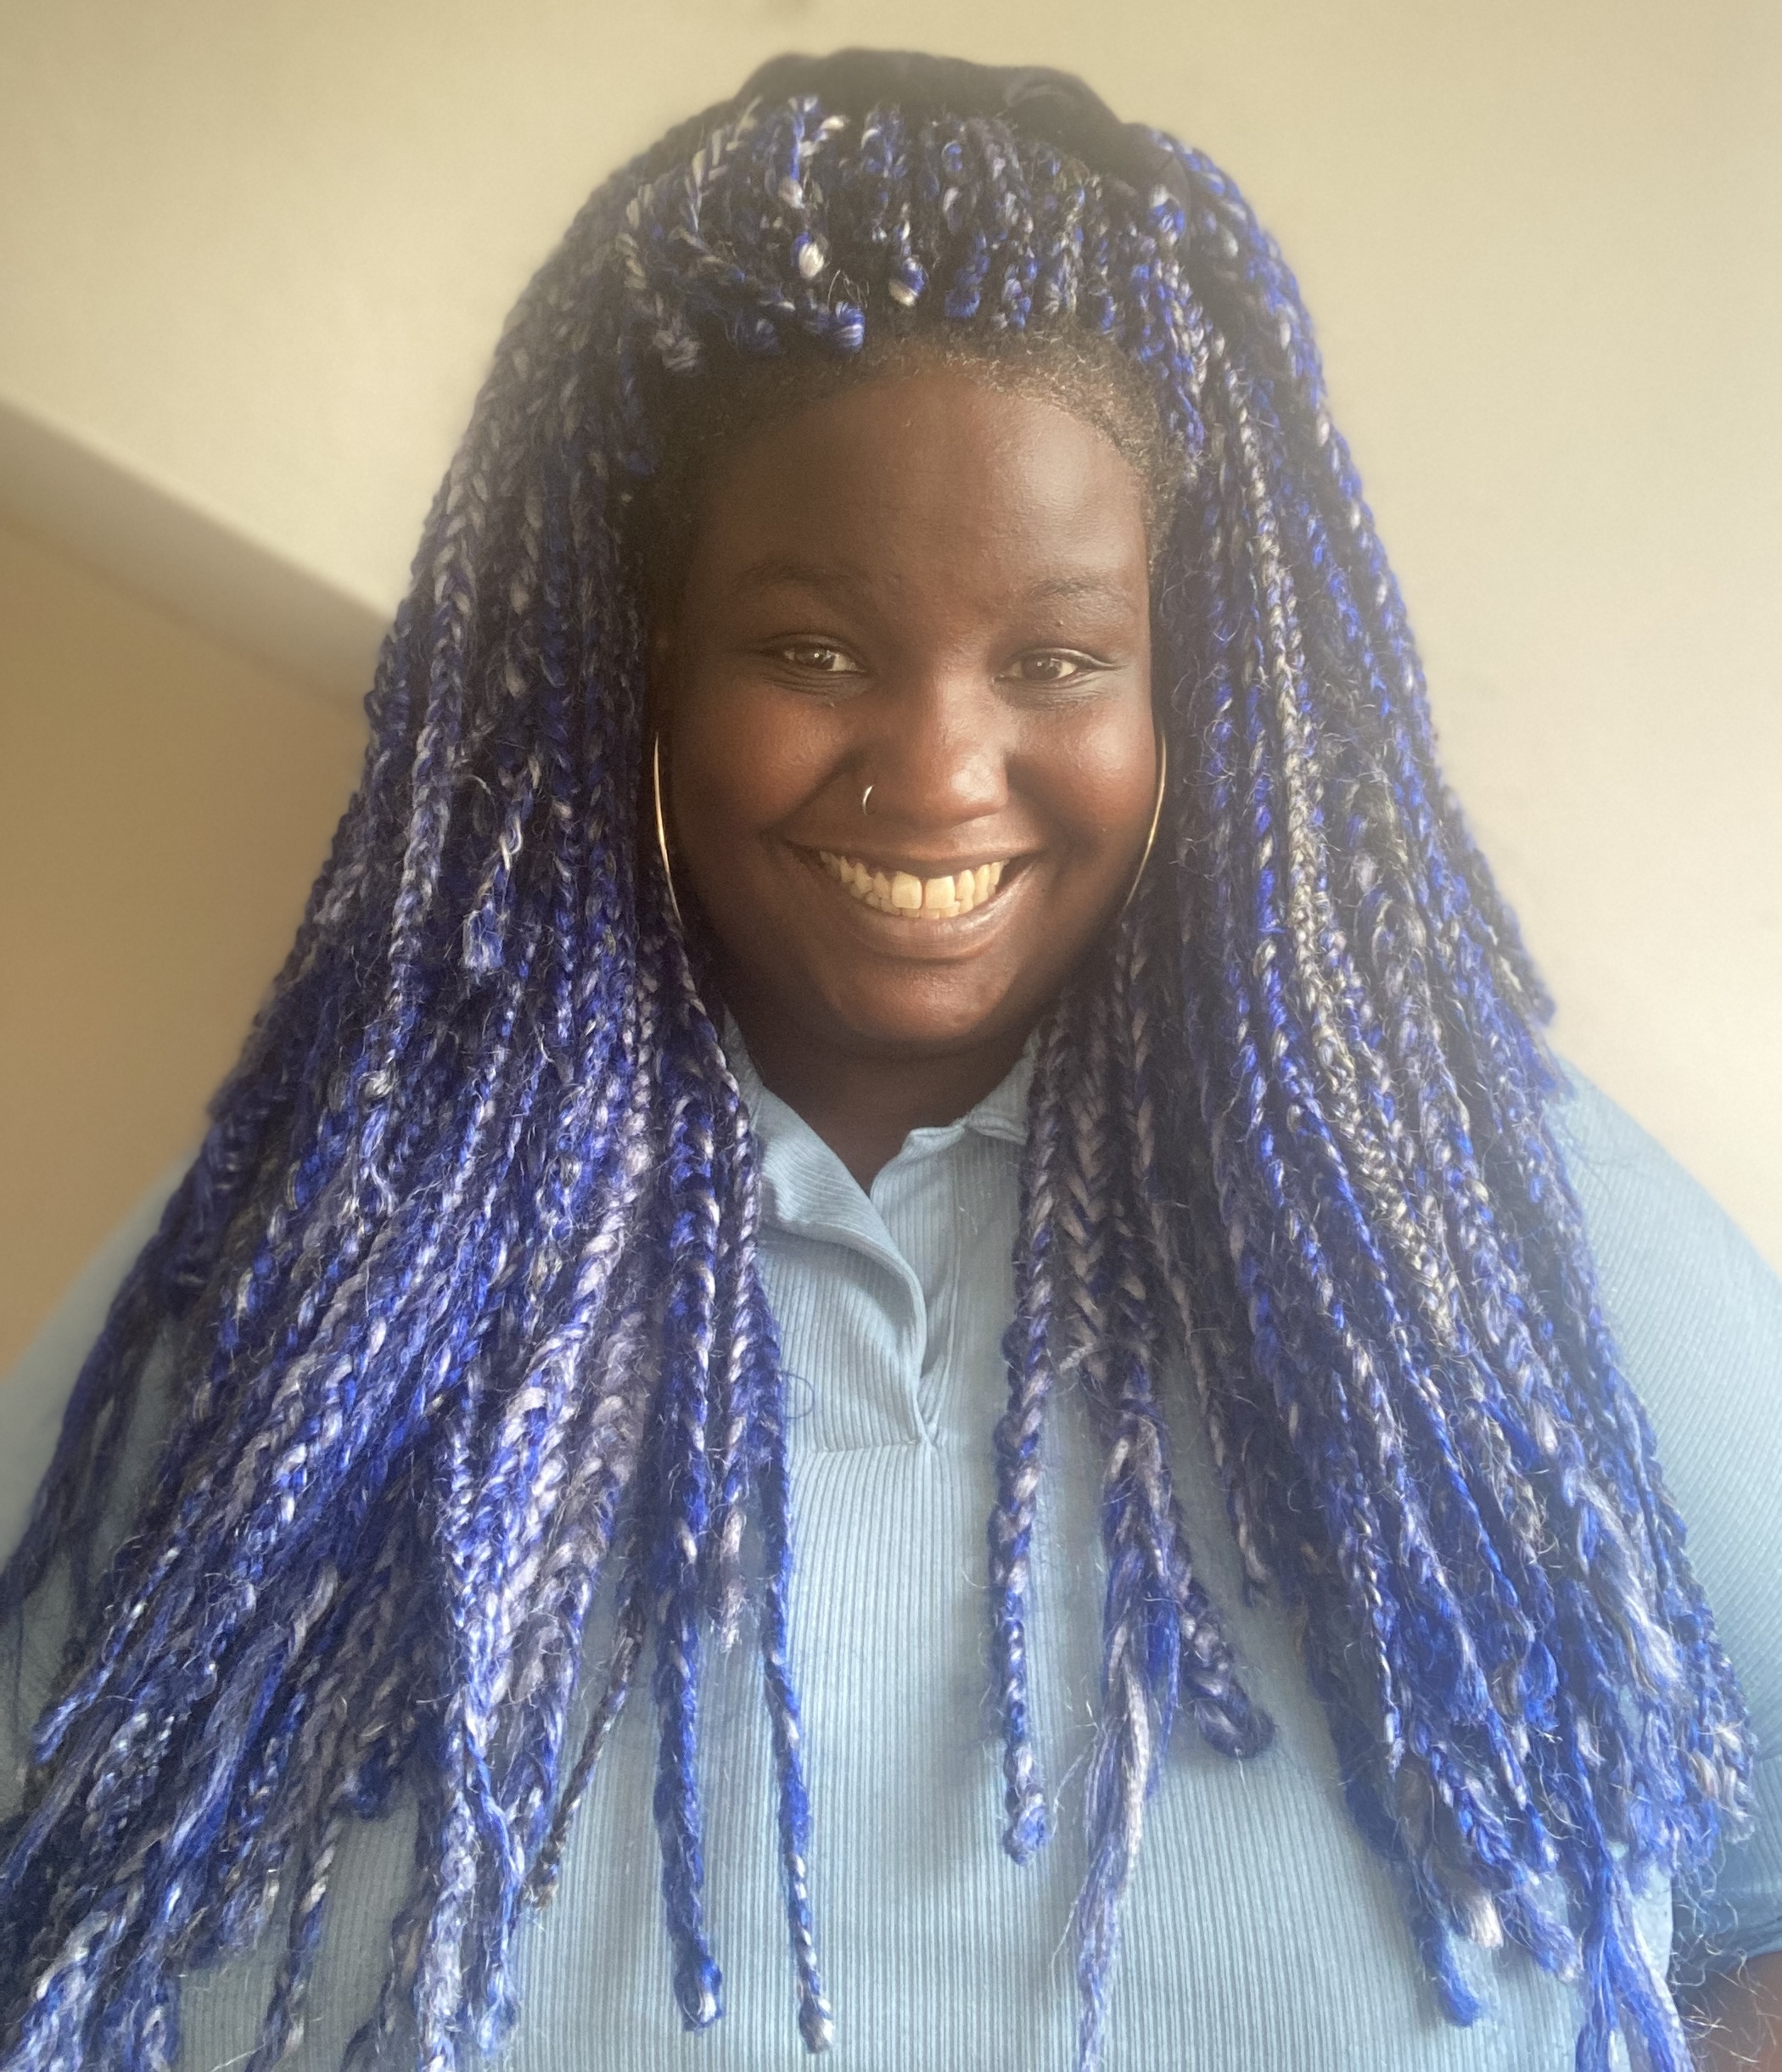 A photo of Ruth Awolola, a black woman with long blue, purple and grey braids and wearing a light blue shirt. She smiles at the camera.